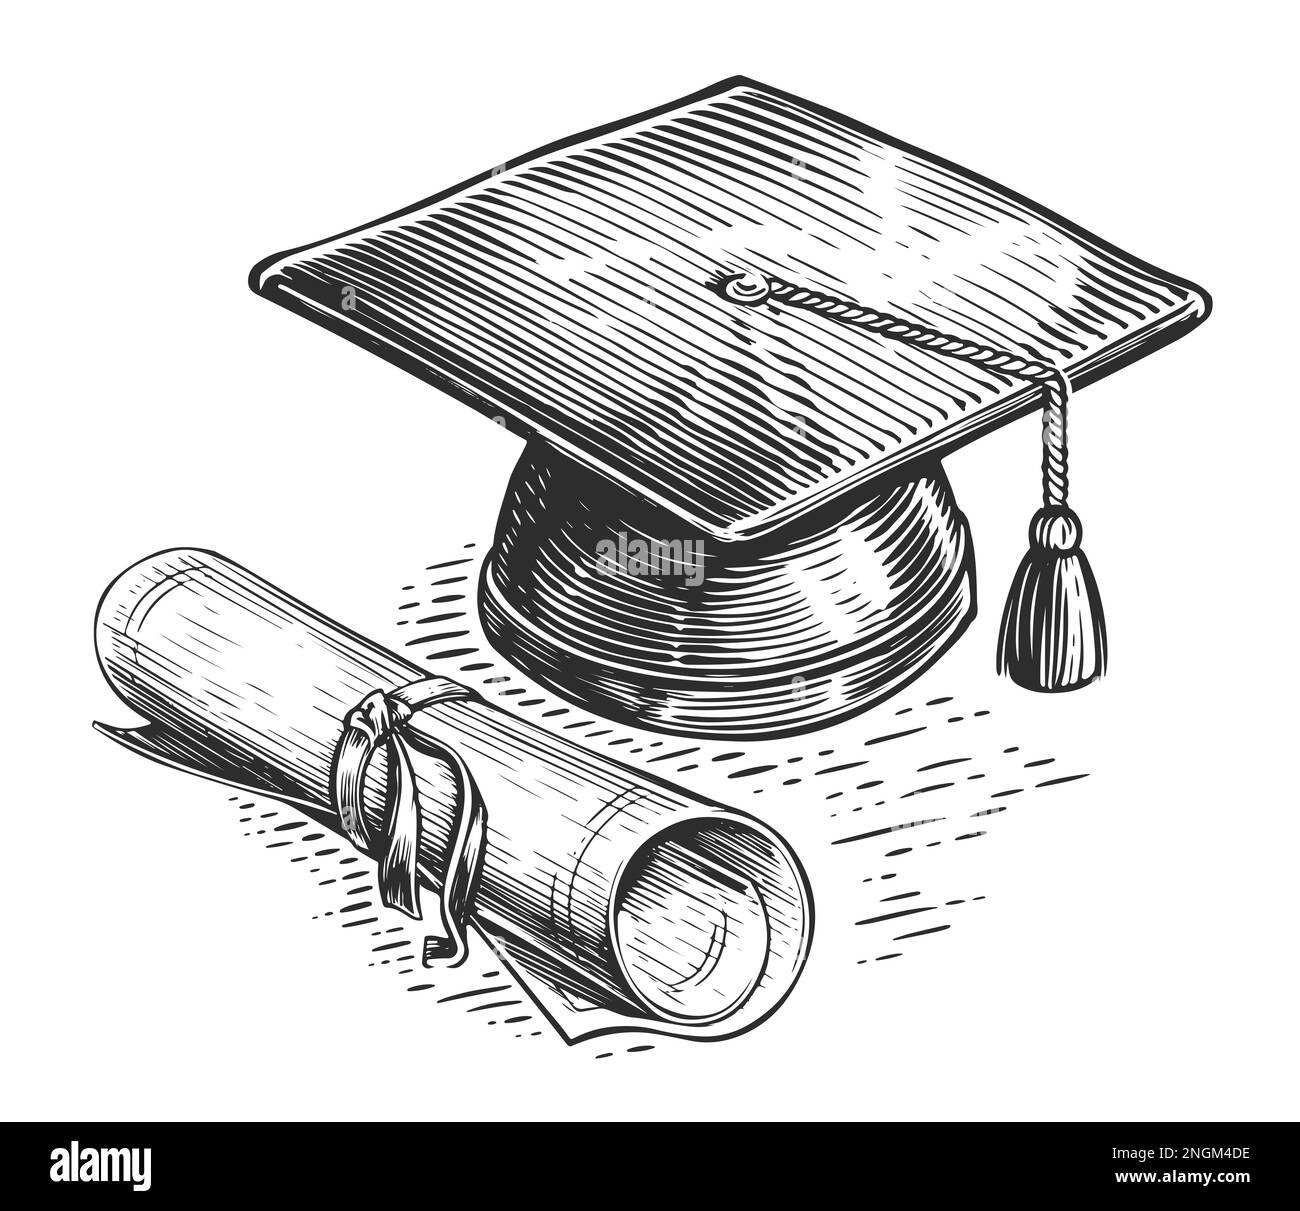 Graduation cap and diploma in sketch style. Academic degree, education concept. Vintage illustration Stock Photo